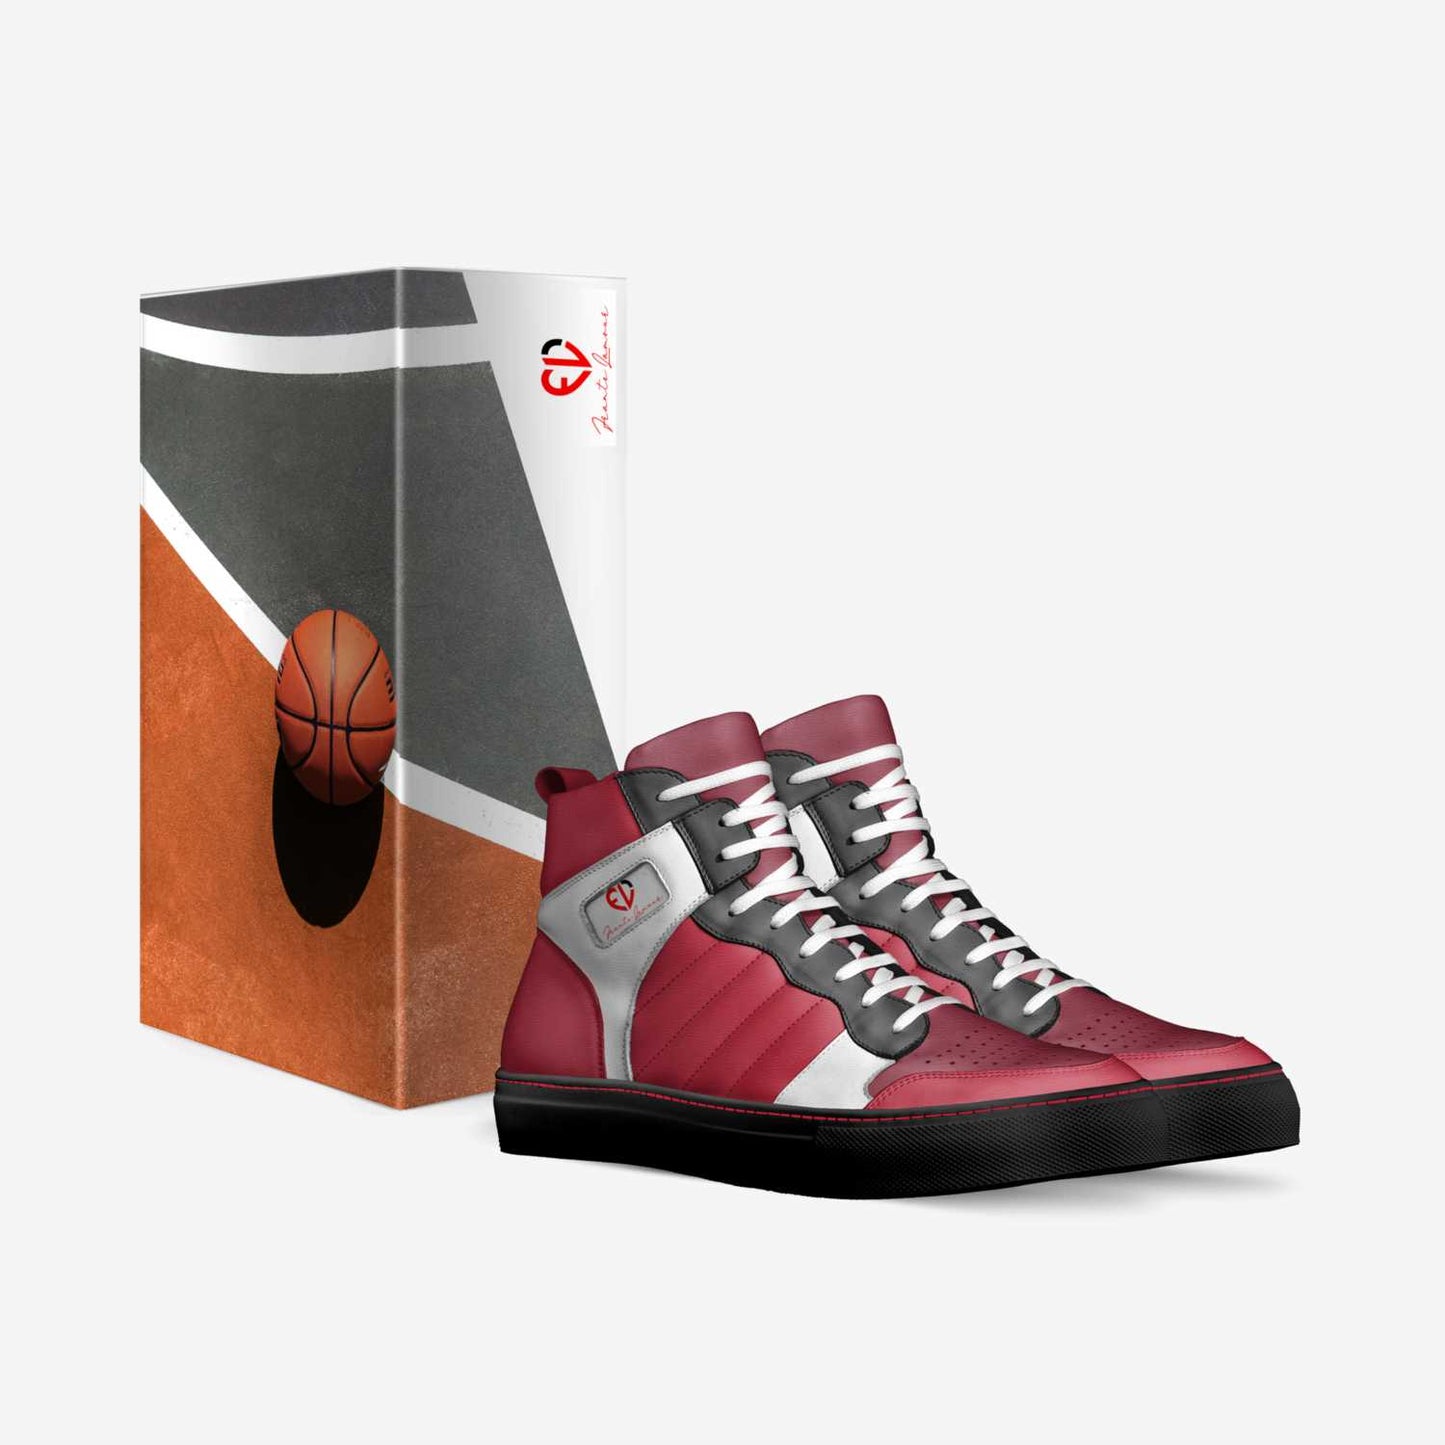 Haiti Retro Basketball By Frantz Lamour - Women's High Top Genuine Leather Lace Up Shoes - Black & Red